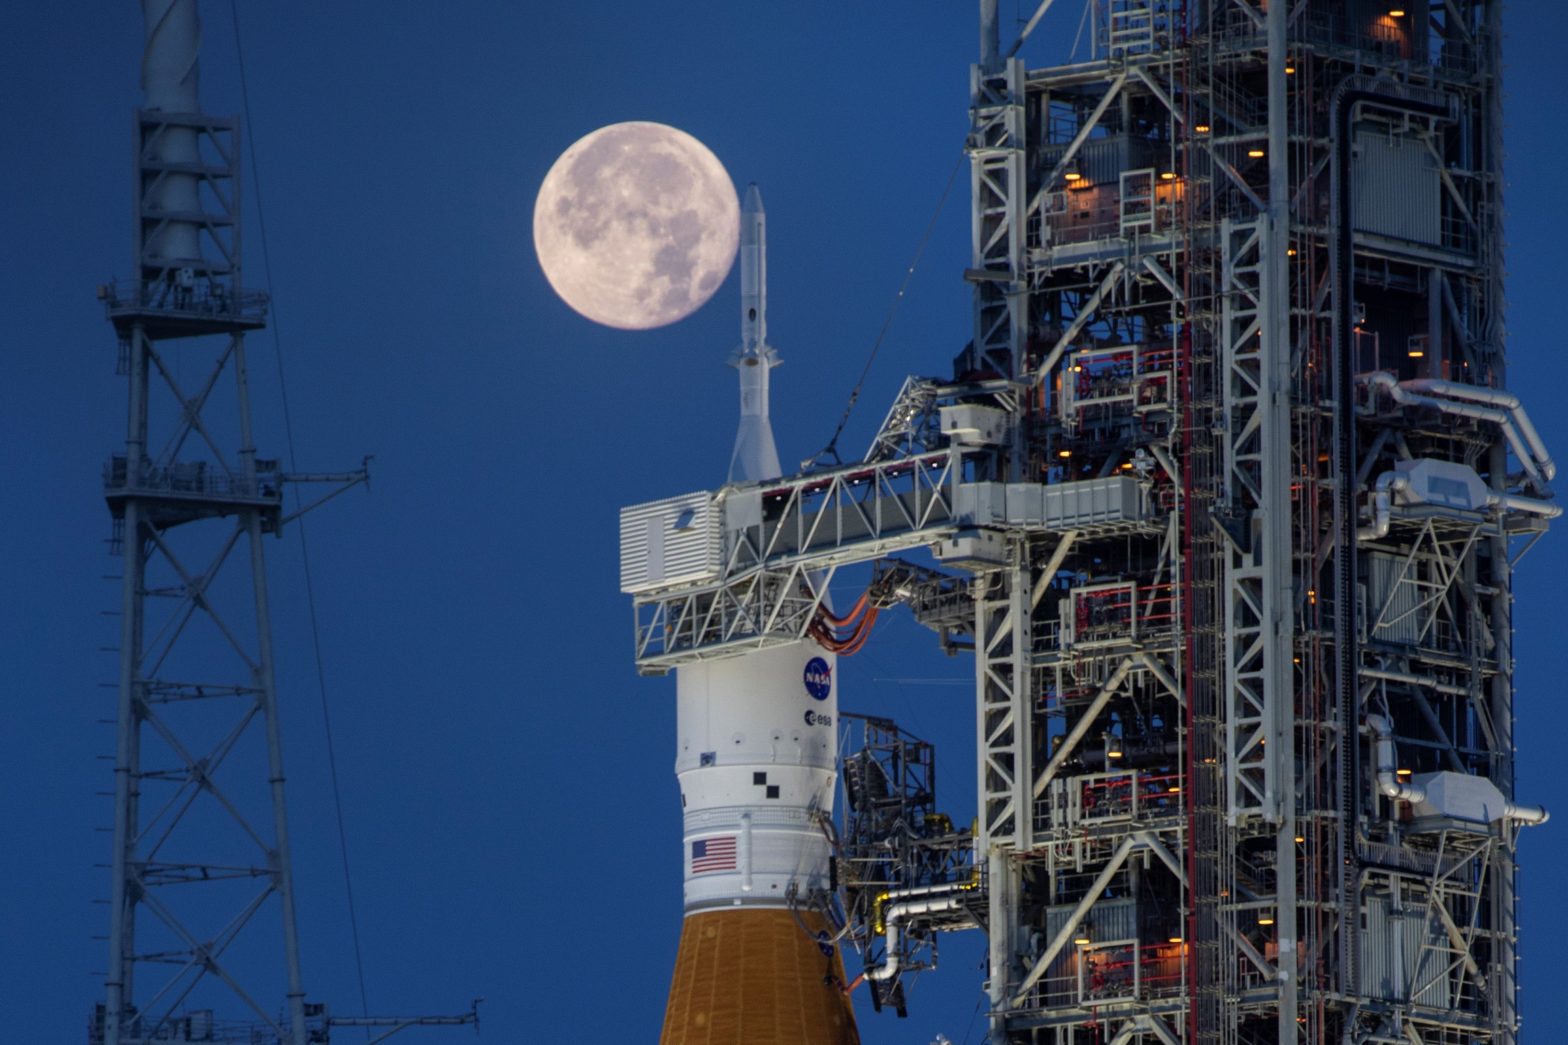 NASA’s Delay of Manned Moon Mission Prompts Questions in Congress